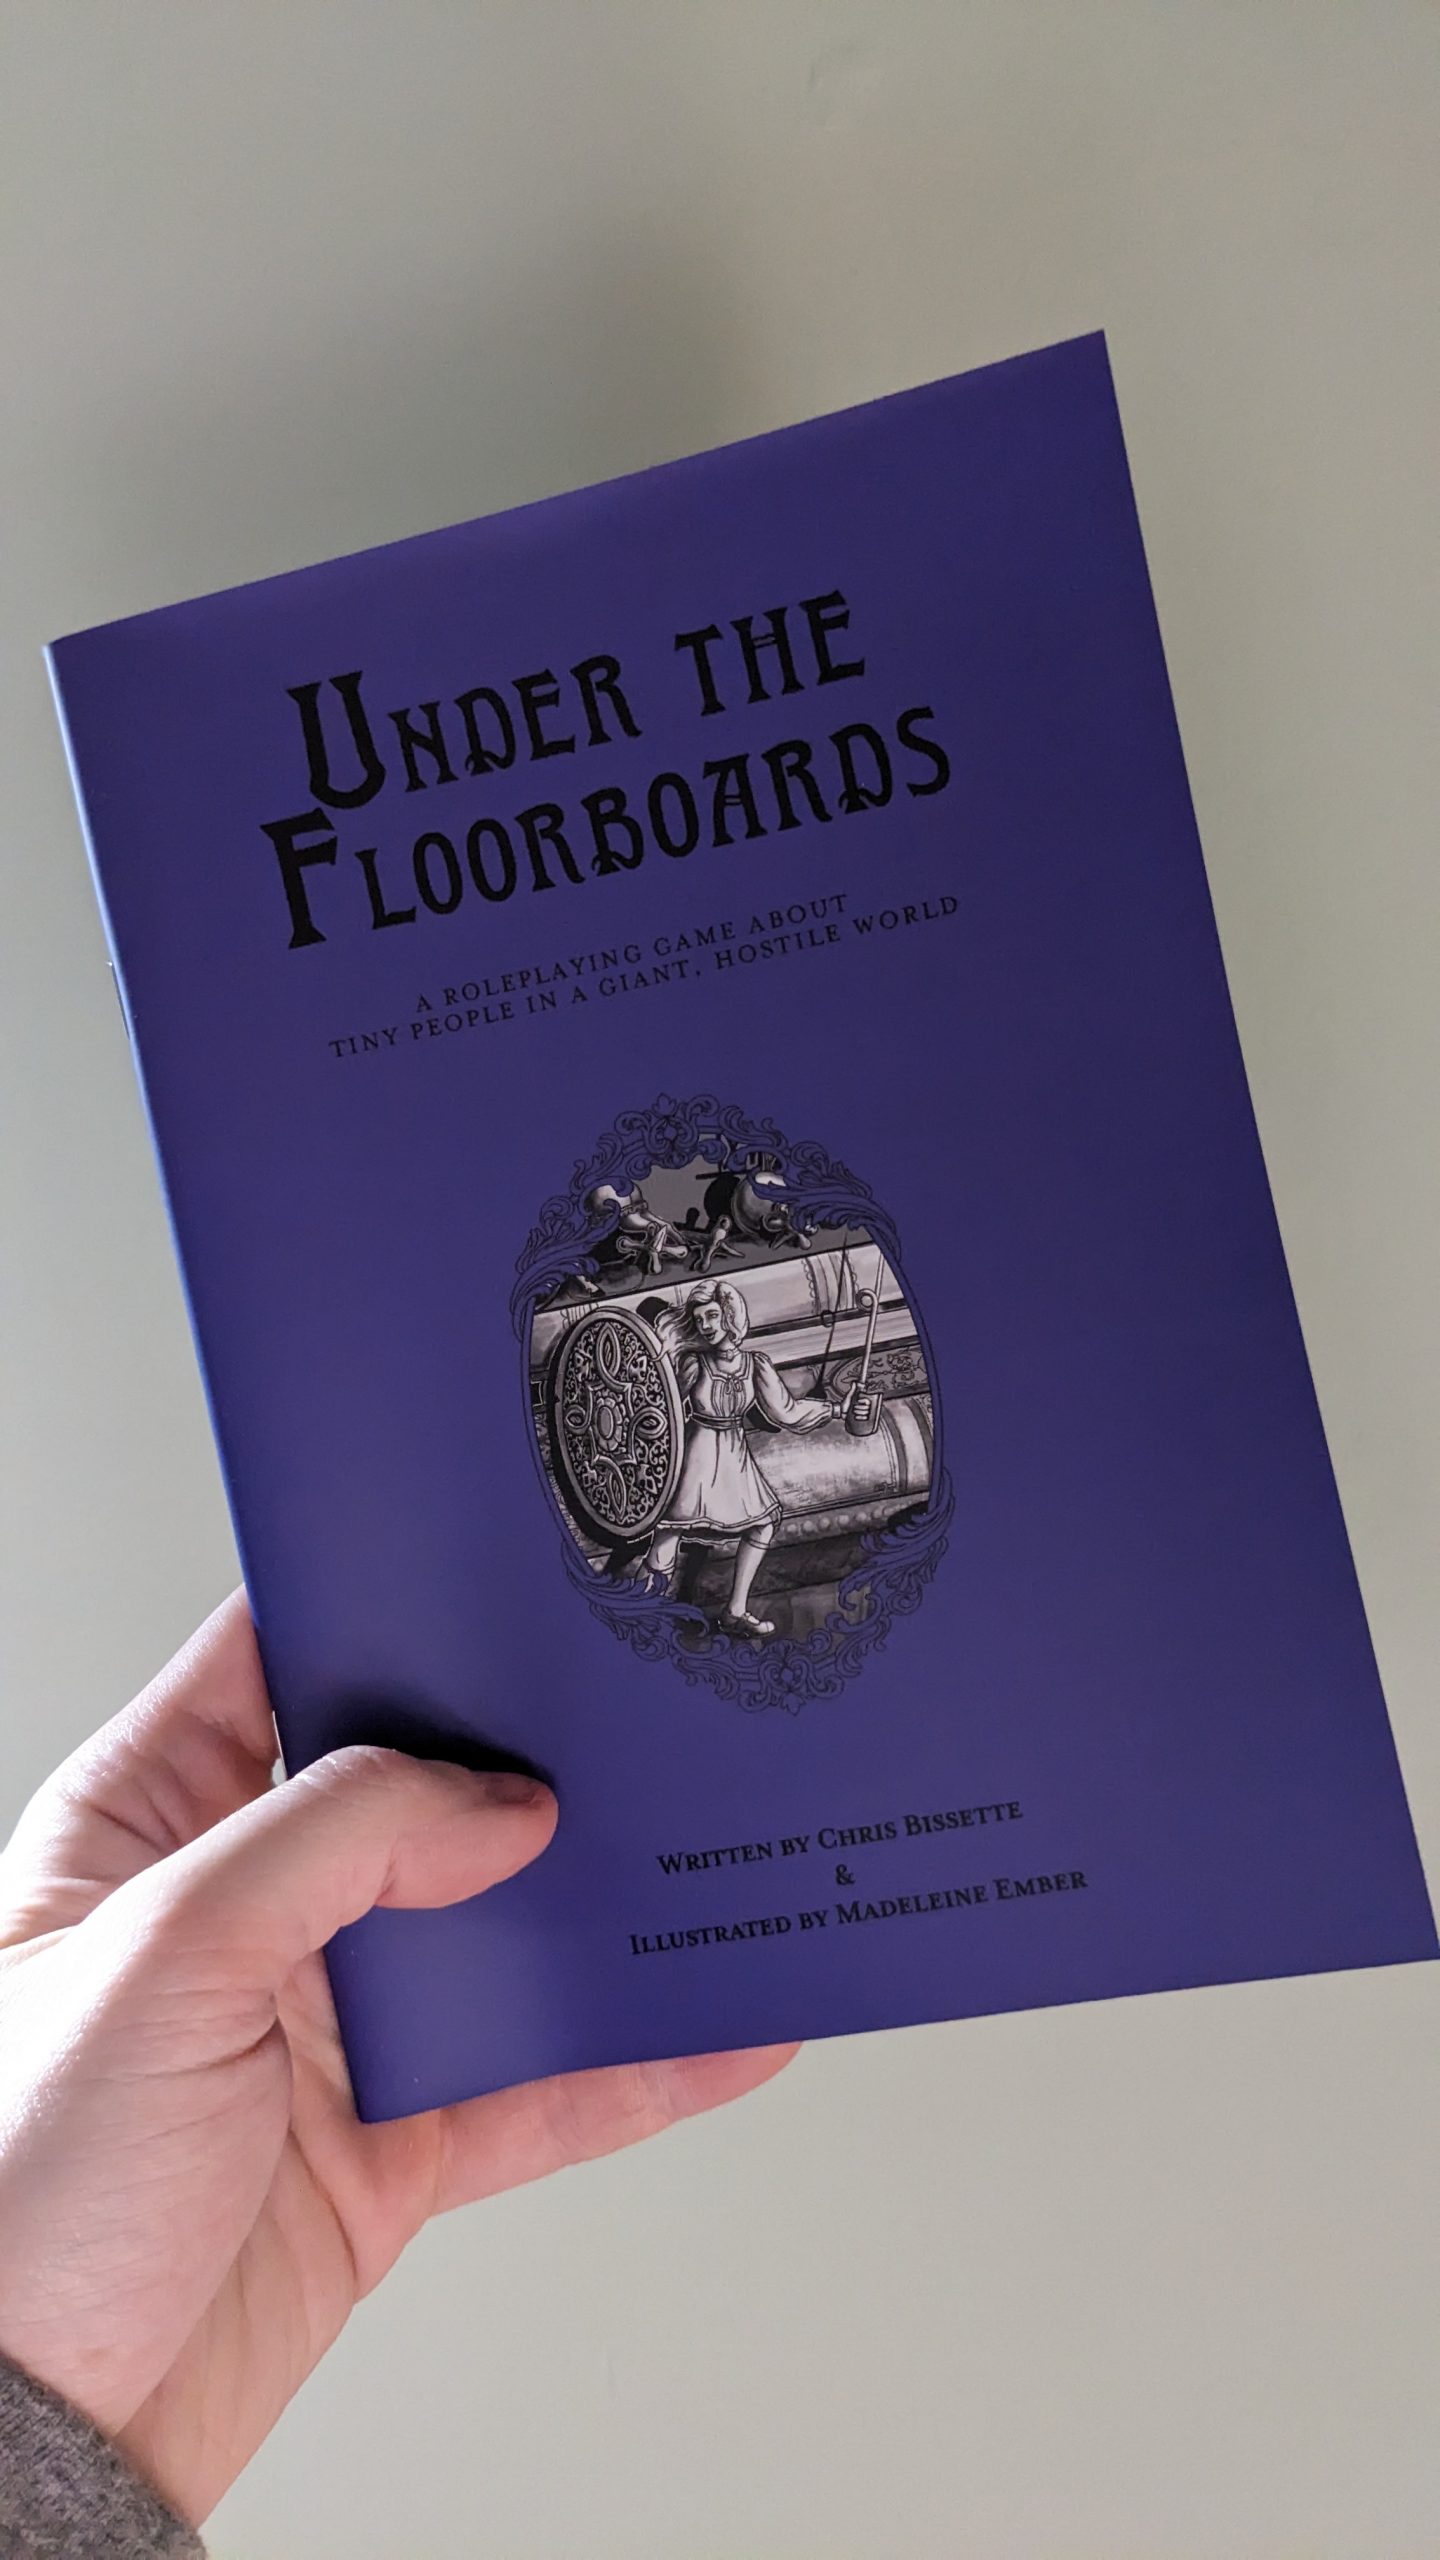 A purple A5 booklet with a black and white illustration of a tiny woman wielding a needle as a sword. The title reads "Under The Floorboards"